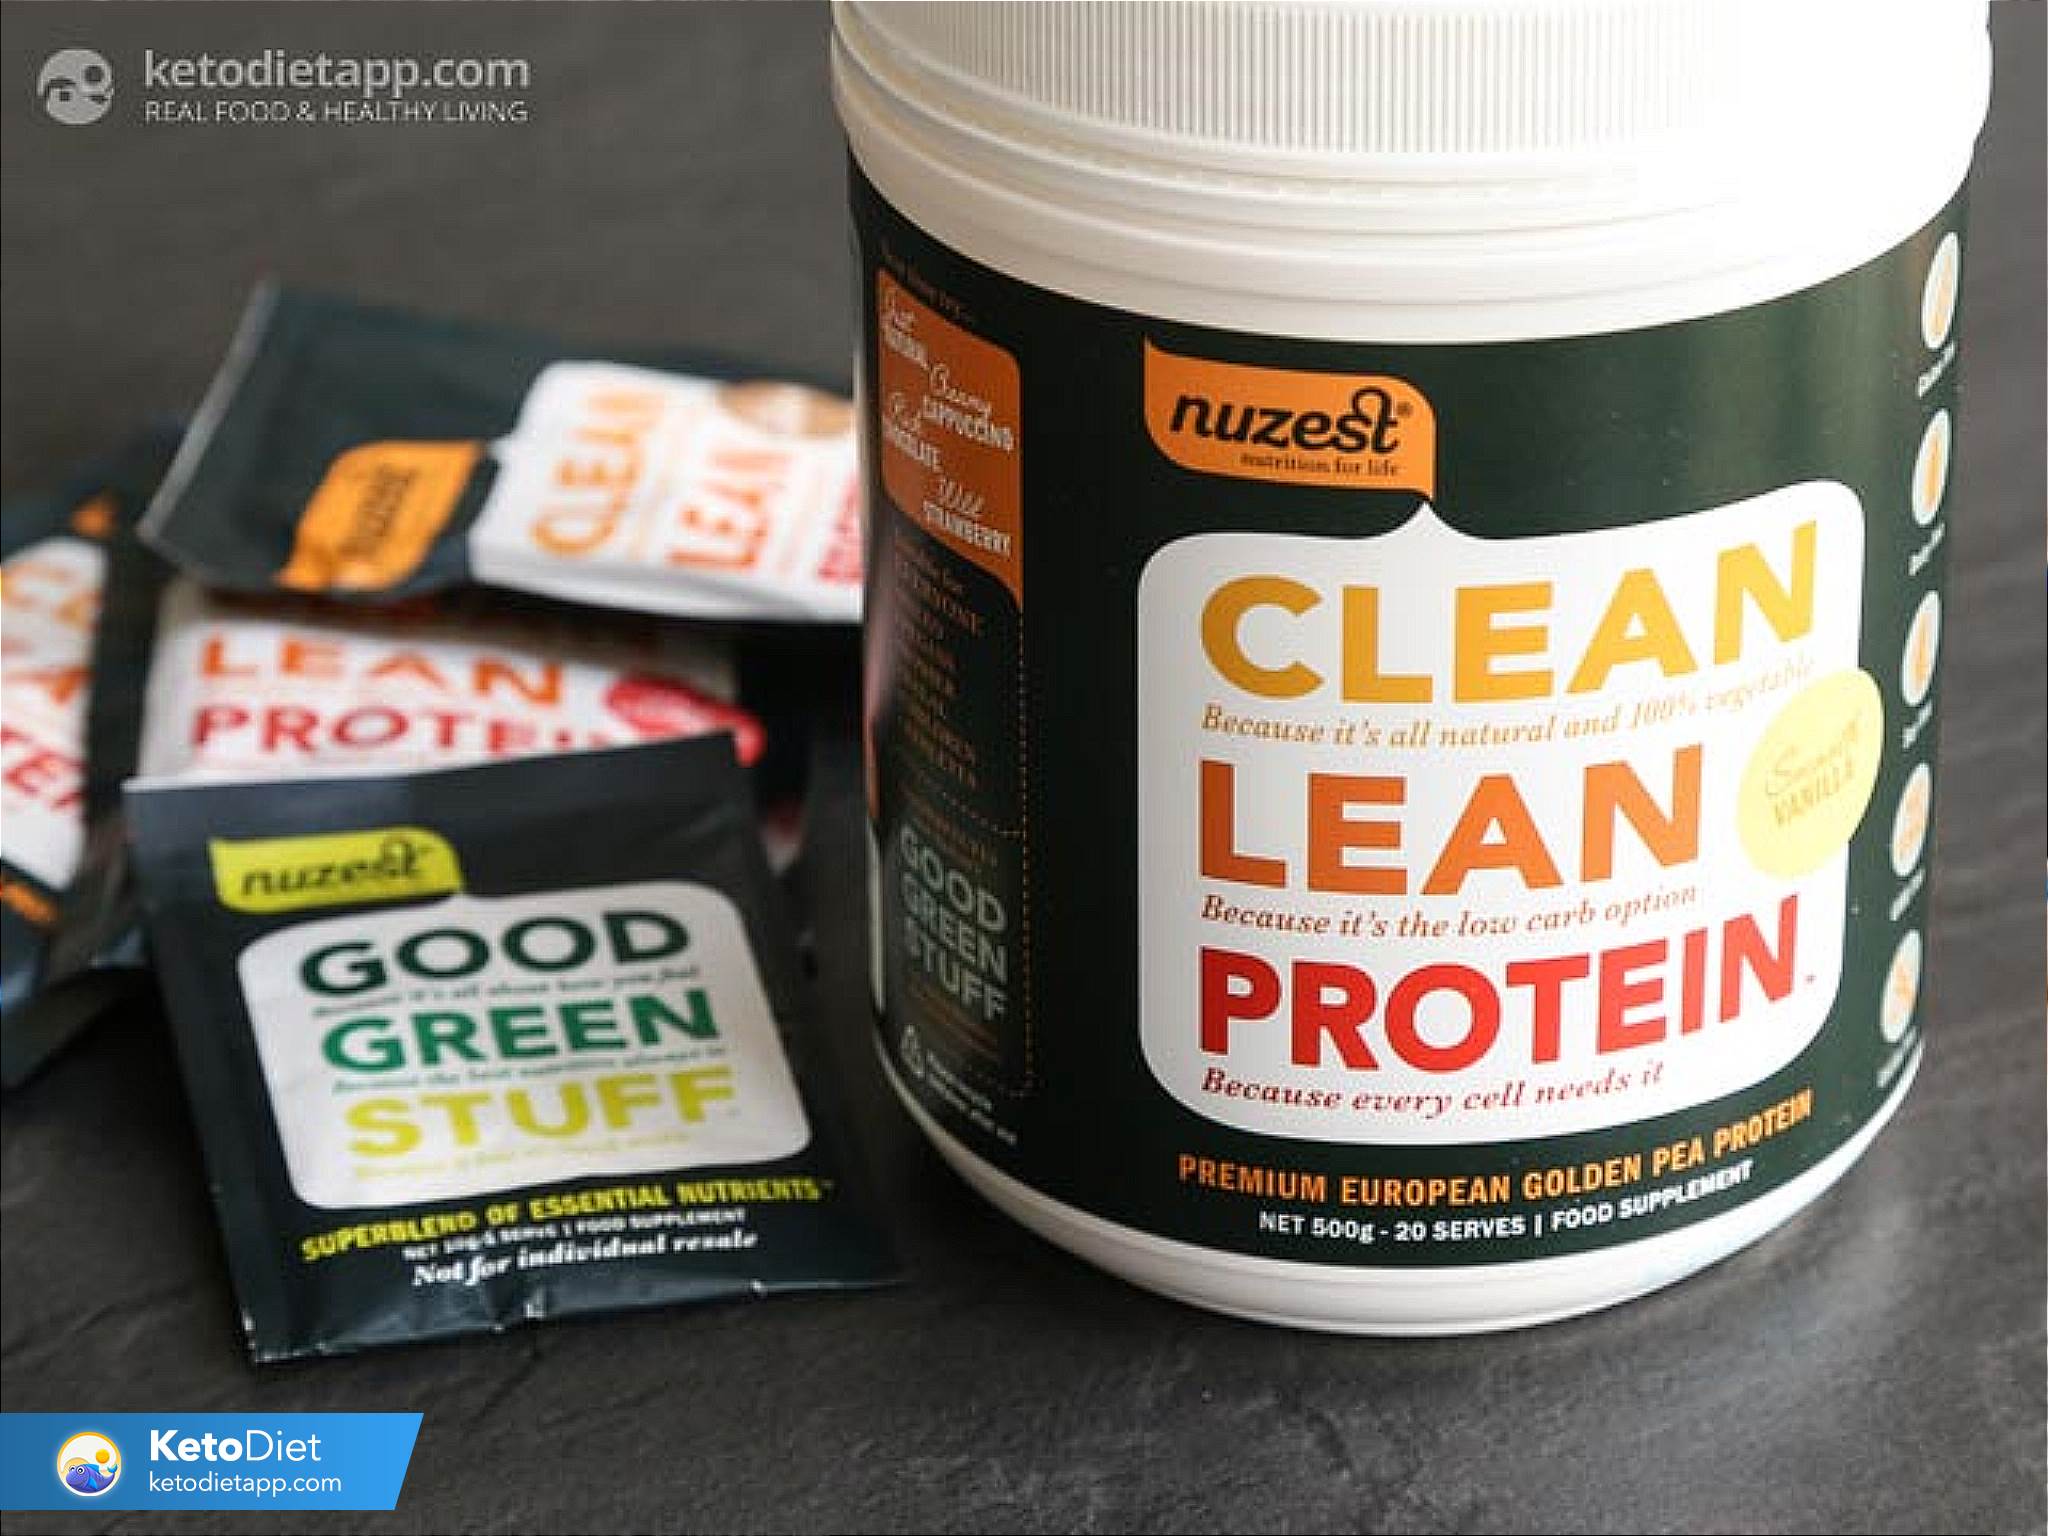 Product Review and Giveaway: Nuzest | KetoDiet Blog